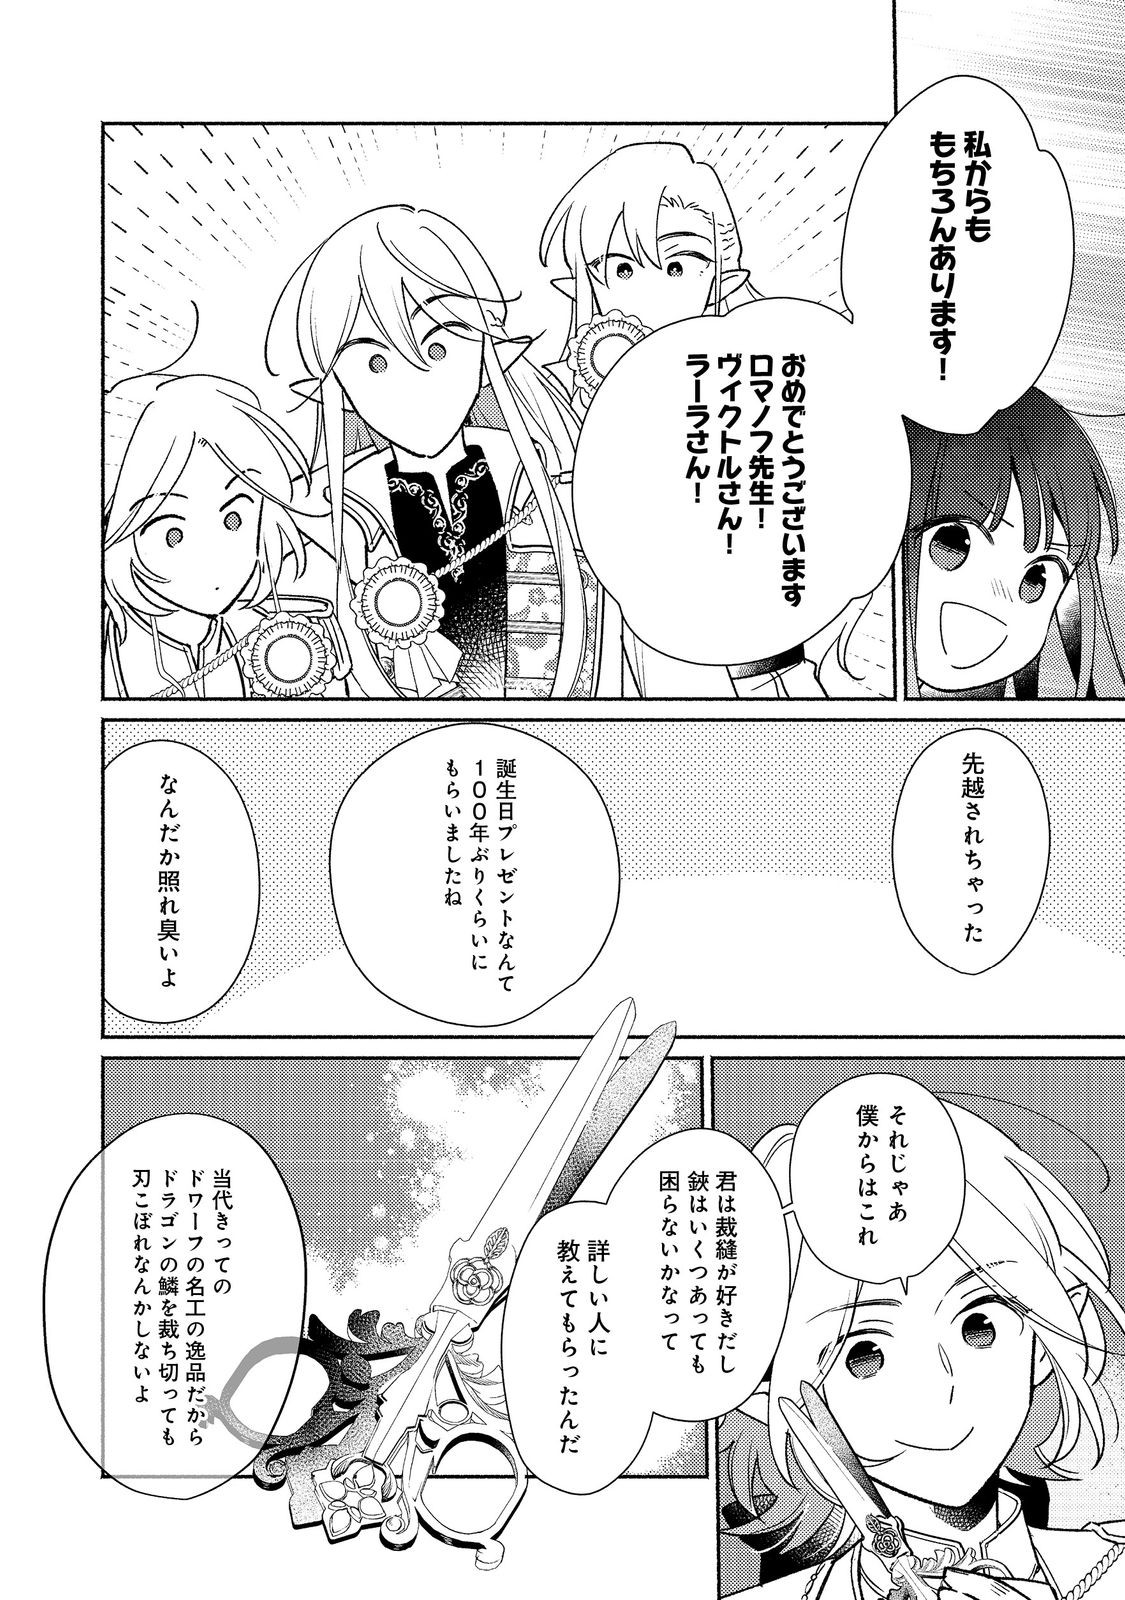 I’m the White Pig Nobleman 第26.2話 - Page 1